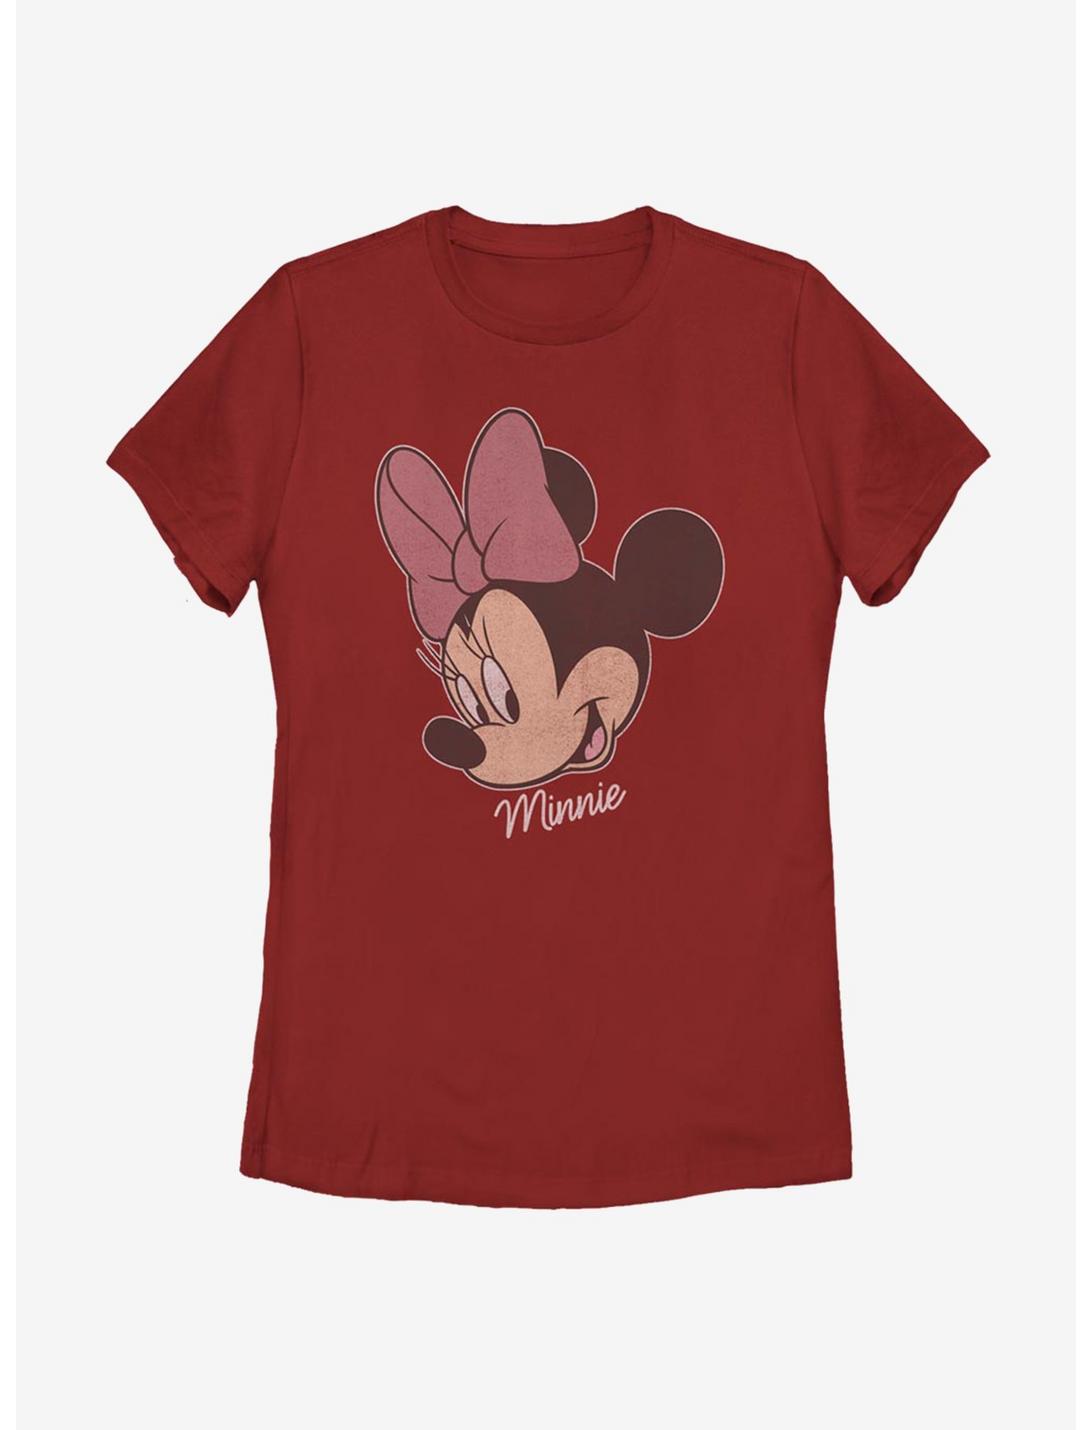 Disney Mickey Mouse Minnie Big Face Distressed Womens T-Shirt, RED, hi-res